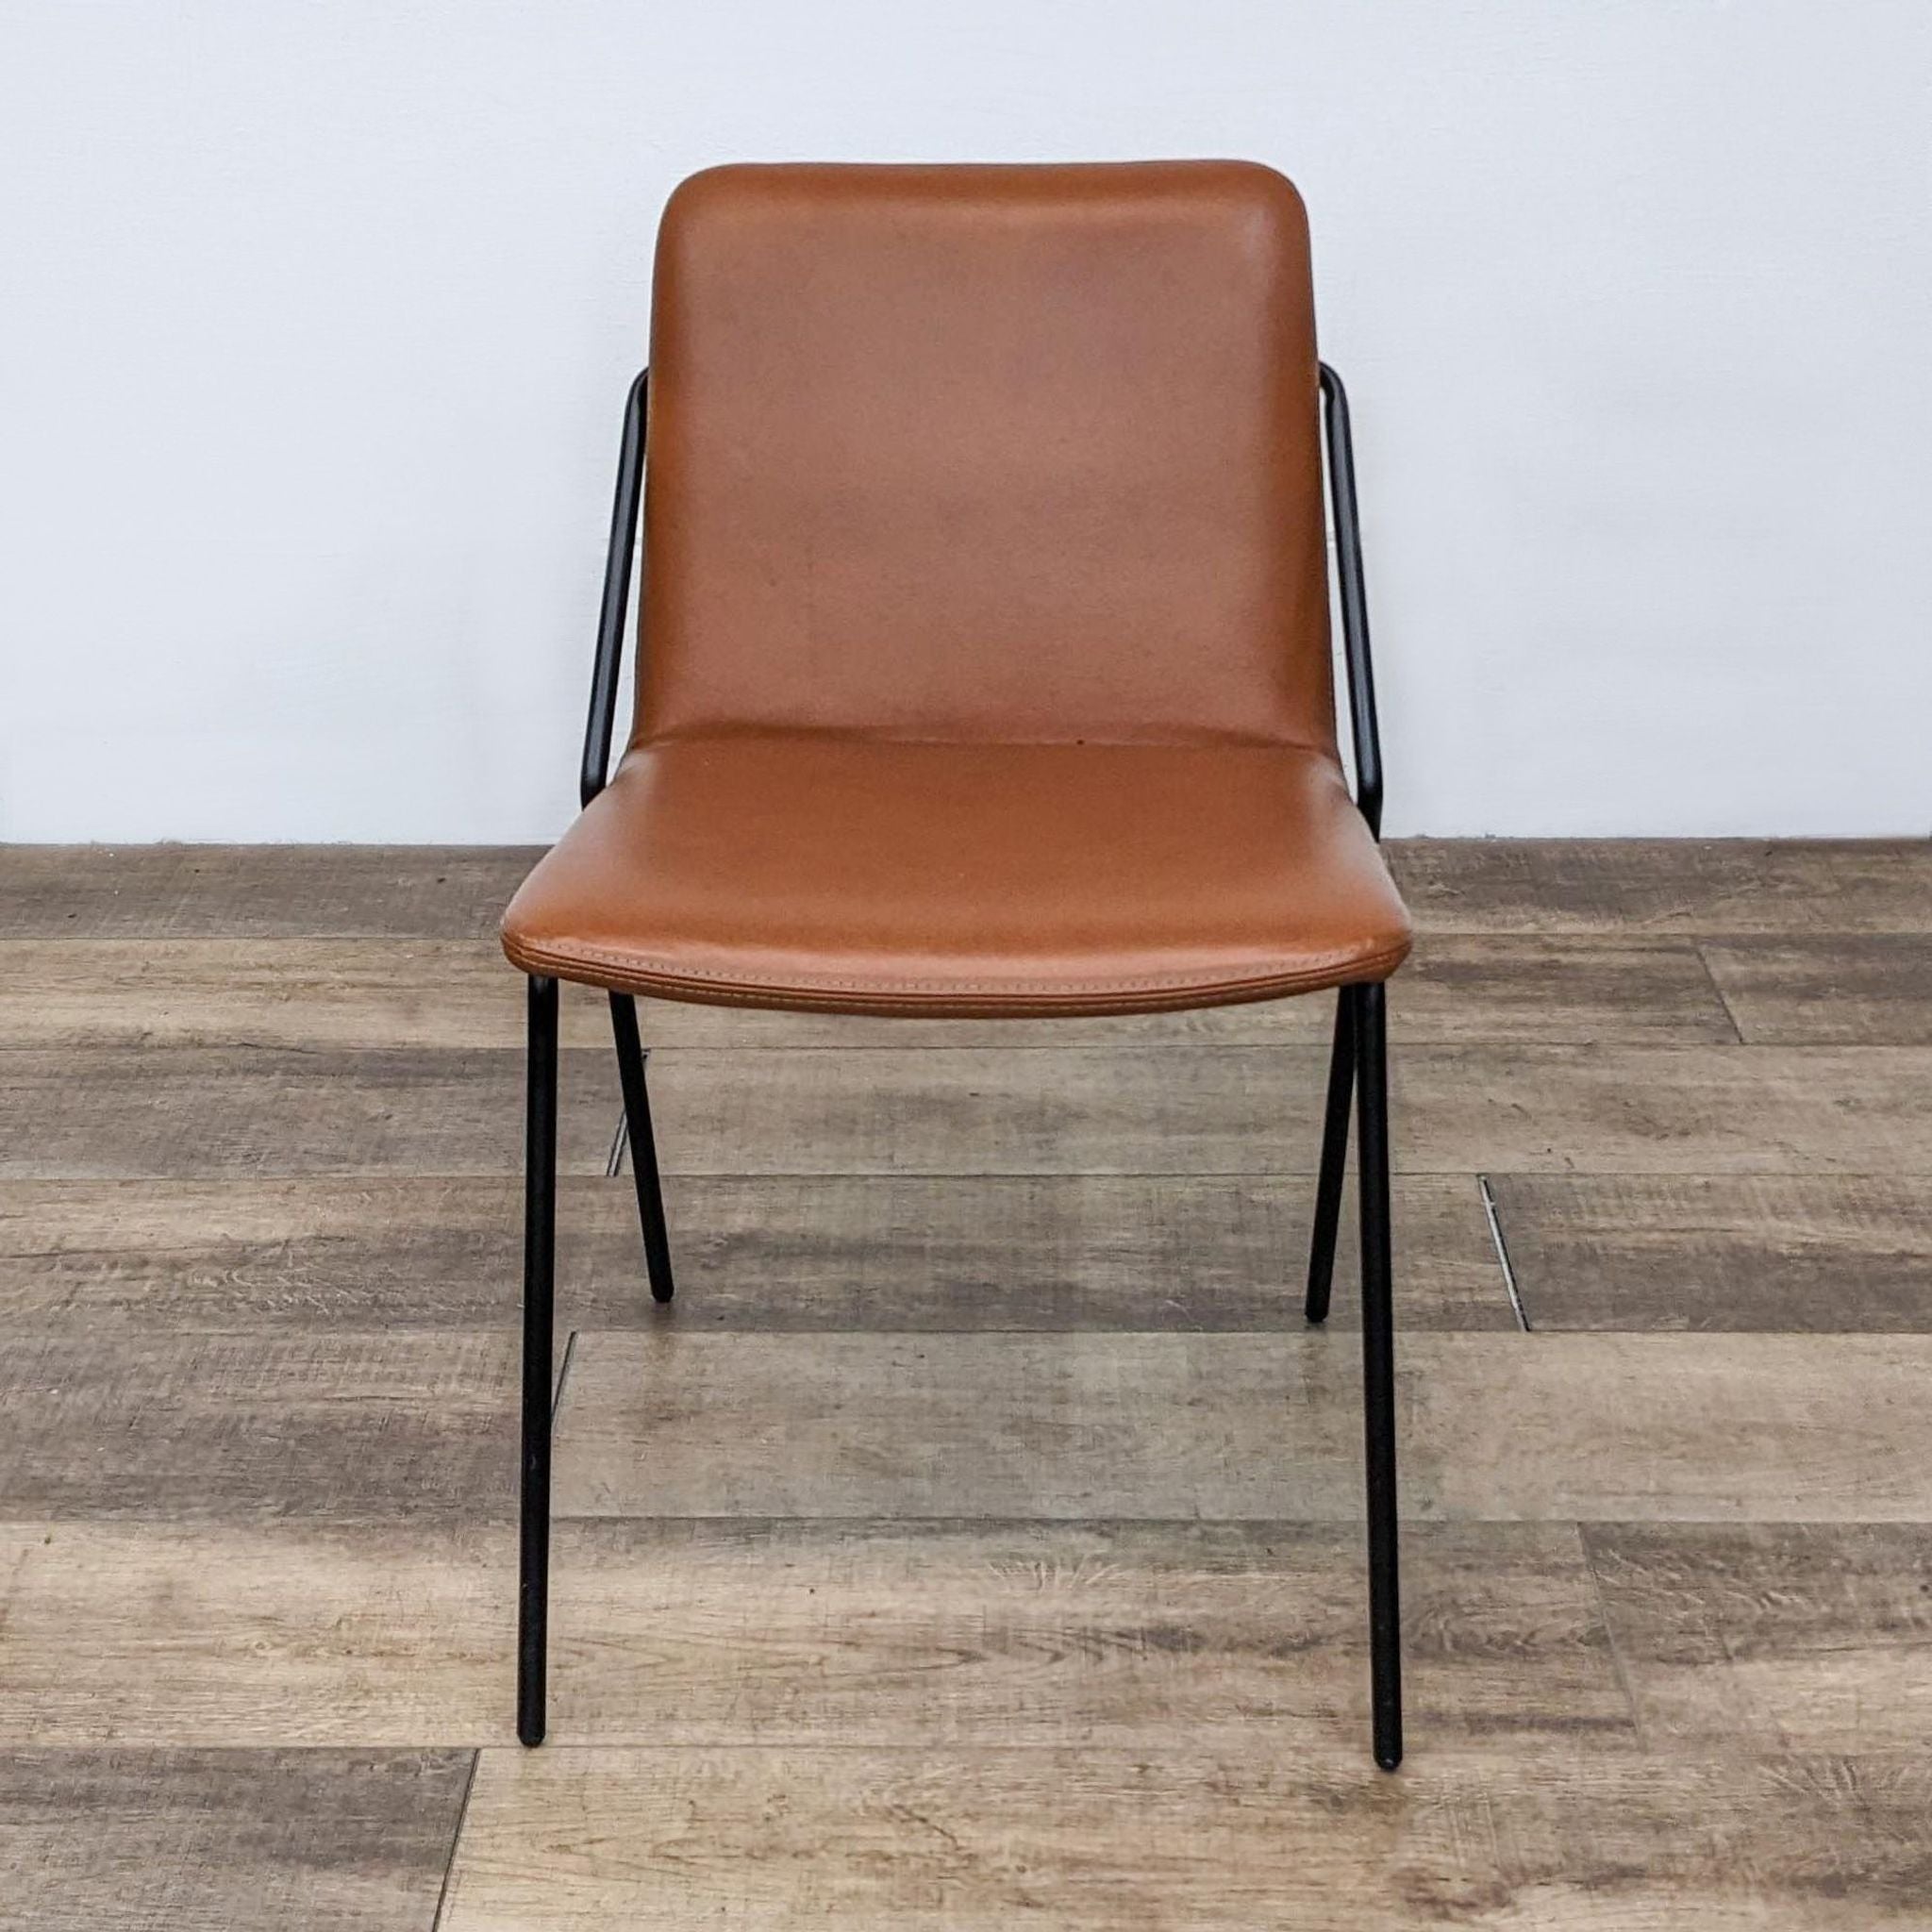 Reperch modern dining chair with angled back leg and vegan leather sling in frontal view on wooden floor.